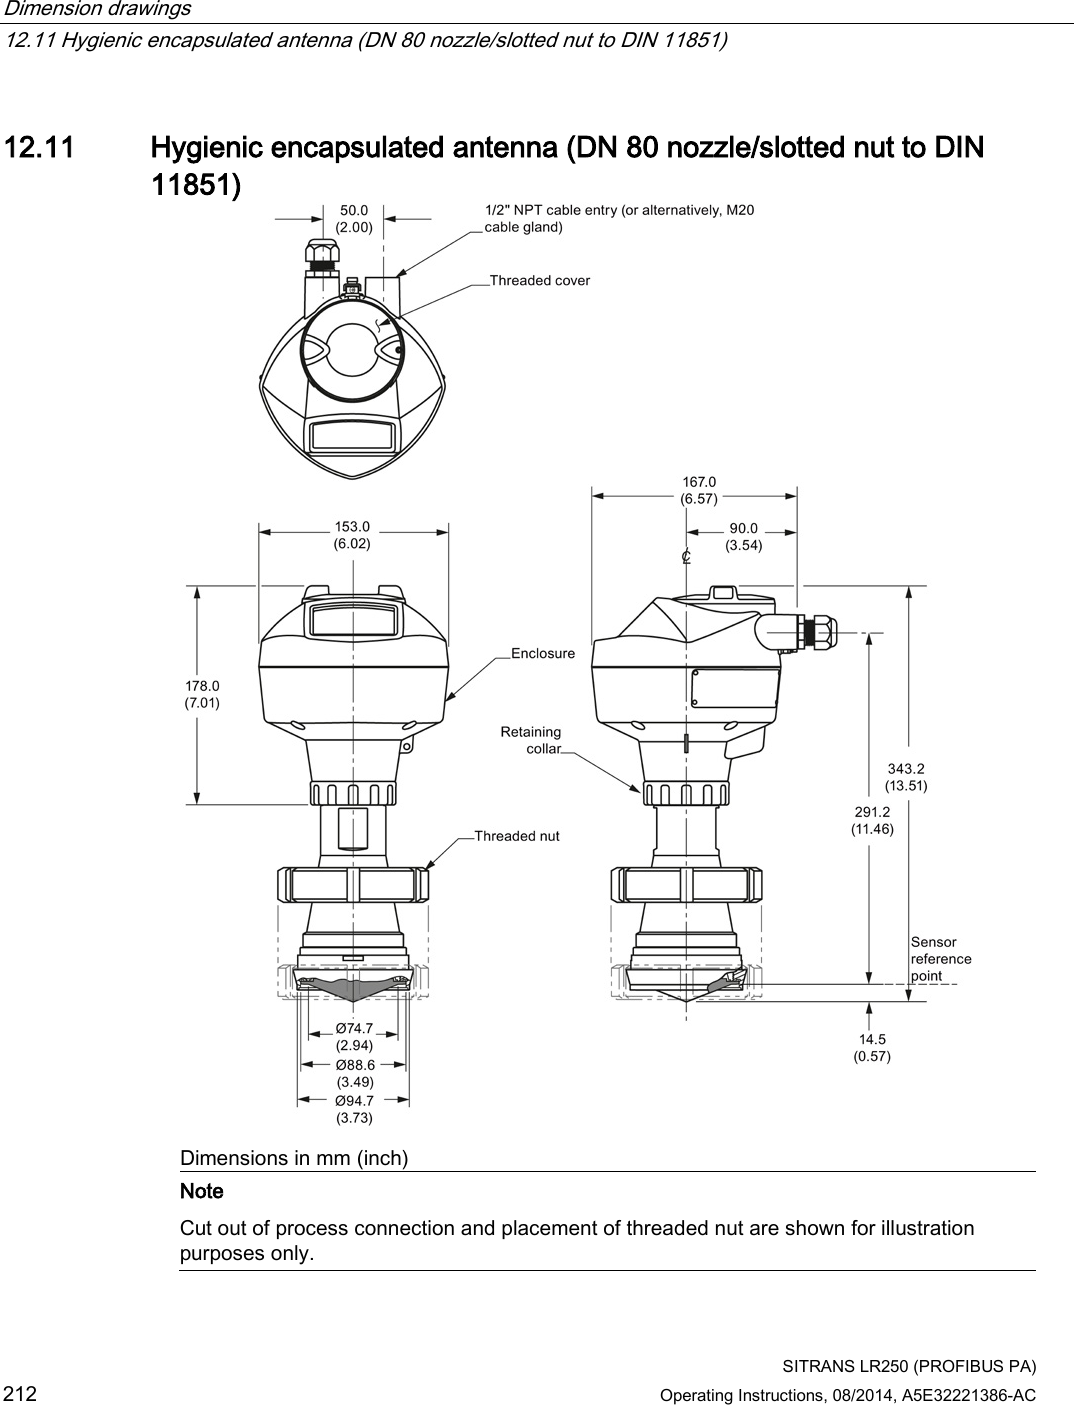 Dimension drawings   12.11 Hygienic encapsulated antenna (DN 80 nozzle/slotted nut to DIN 11851)  SITRANS LR250 (PROFIBUS PA) 212 Operating Instructions, 08/2014, A5E32221386-AC  12.11 Hygienic encapsulated antenna (DN 80 nozzle/slotted nut to DIN 11851)  Dimensions in mm (inch)  Note Cut out of process connection and placement of threaded nut are shown for illustration purposes only.  